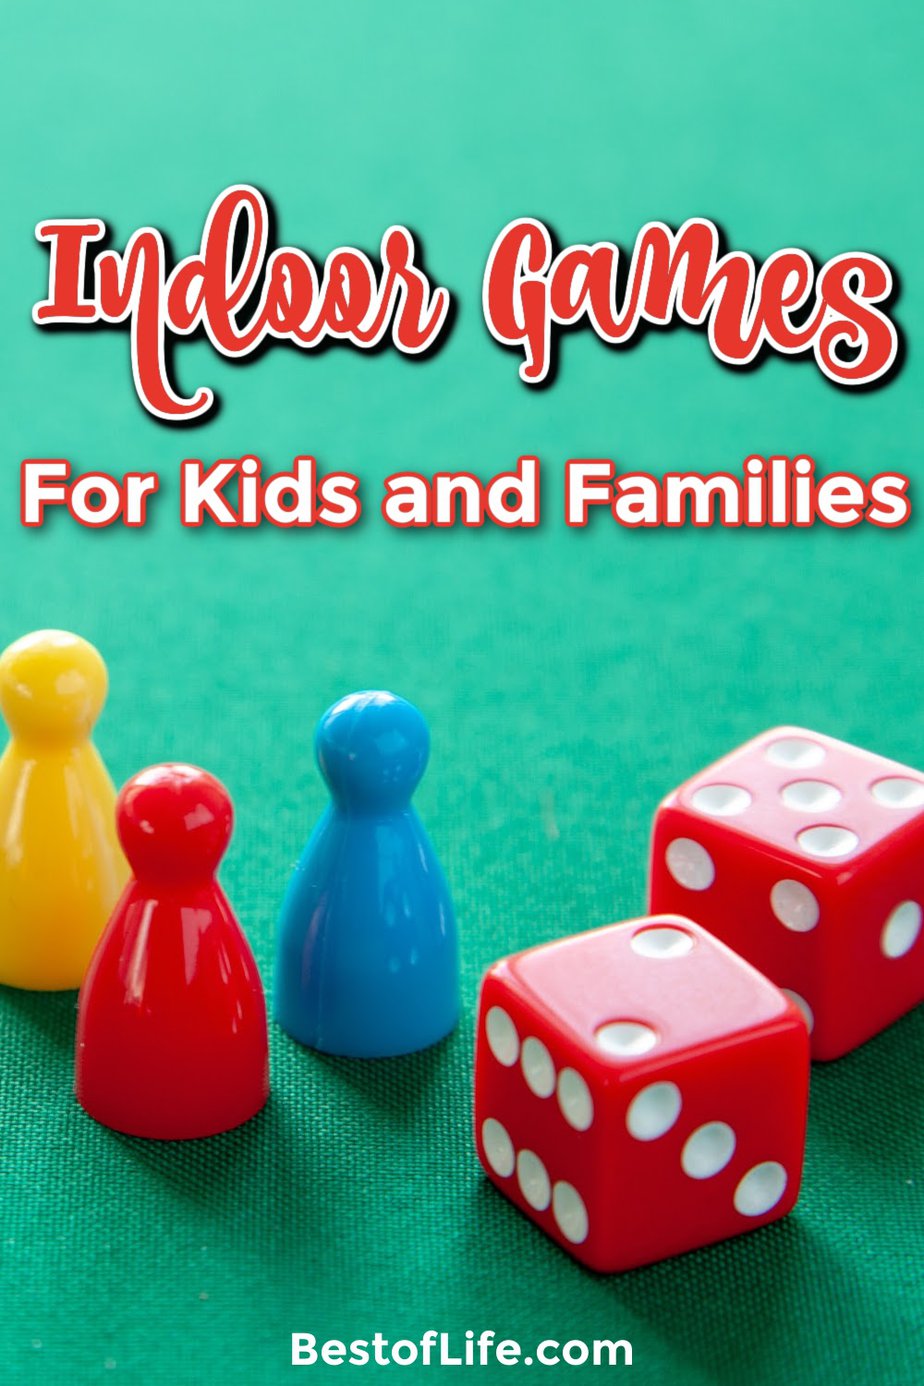 There are fun indoor games for kids that parents can use to help keep kids entertained inside when there are no other options. Parenting Tips | Things to do with Kids | Indoor Games for Toddlers | At Home Activities for Kids | DIY Things to do for Kids | Rainy Day Activities for Kids | Things to do on Rainy Days with Kids #parentingtips #parenting